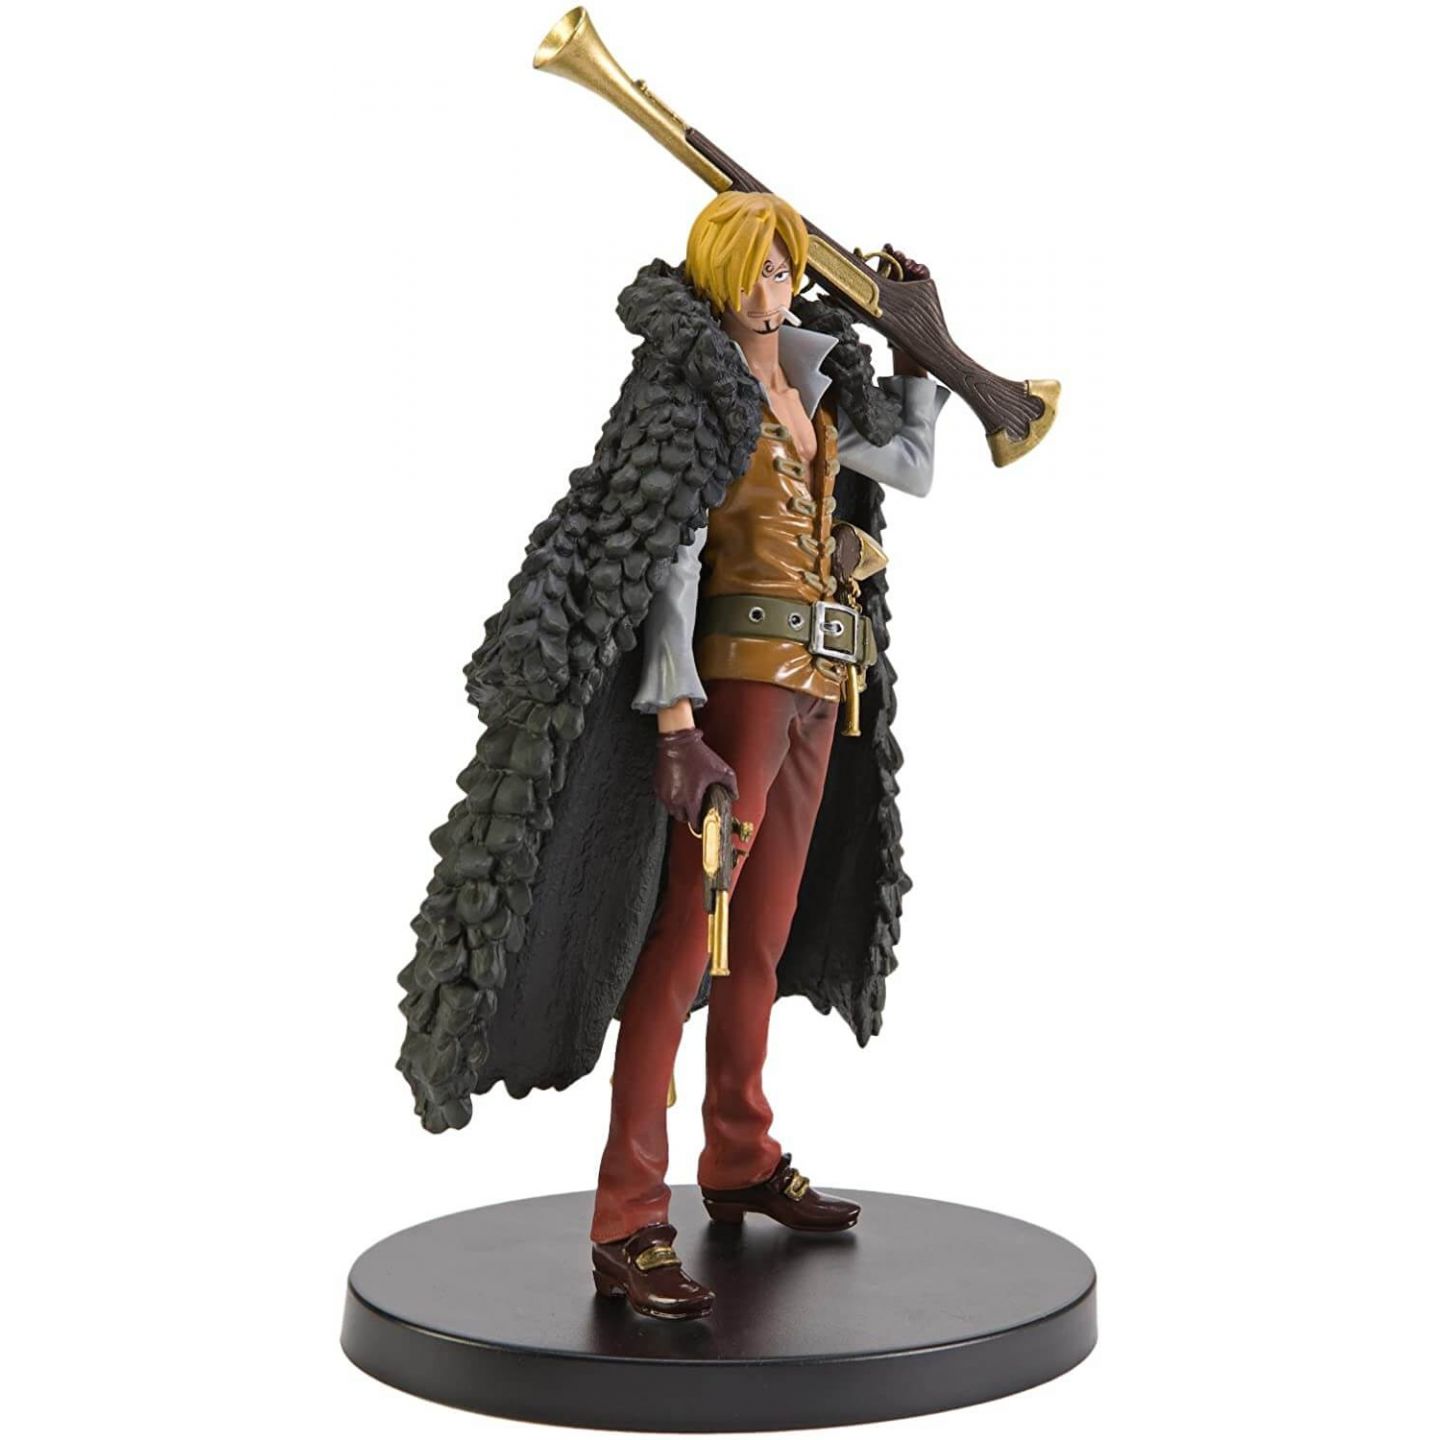 Japan import / The package and the manual are written in Japanese immediate delivery Sanji One Piece DXF ~ THE GRANDLINE MEN ~ FILM Z vol.3 SANJI film Georgette combat uniform movie theater animation prize Banpresto